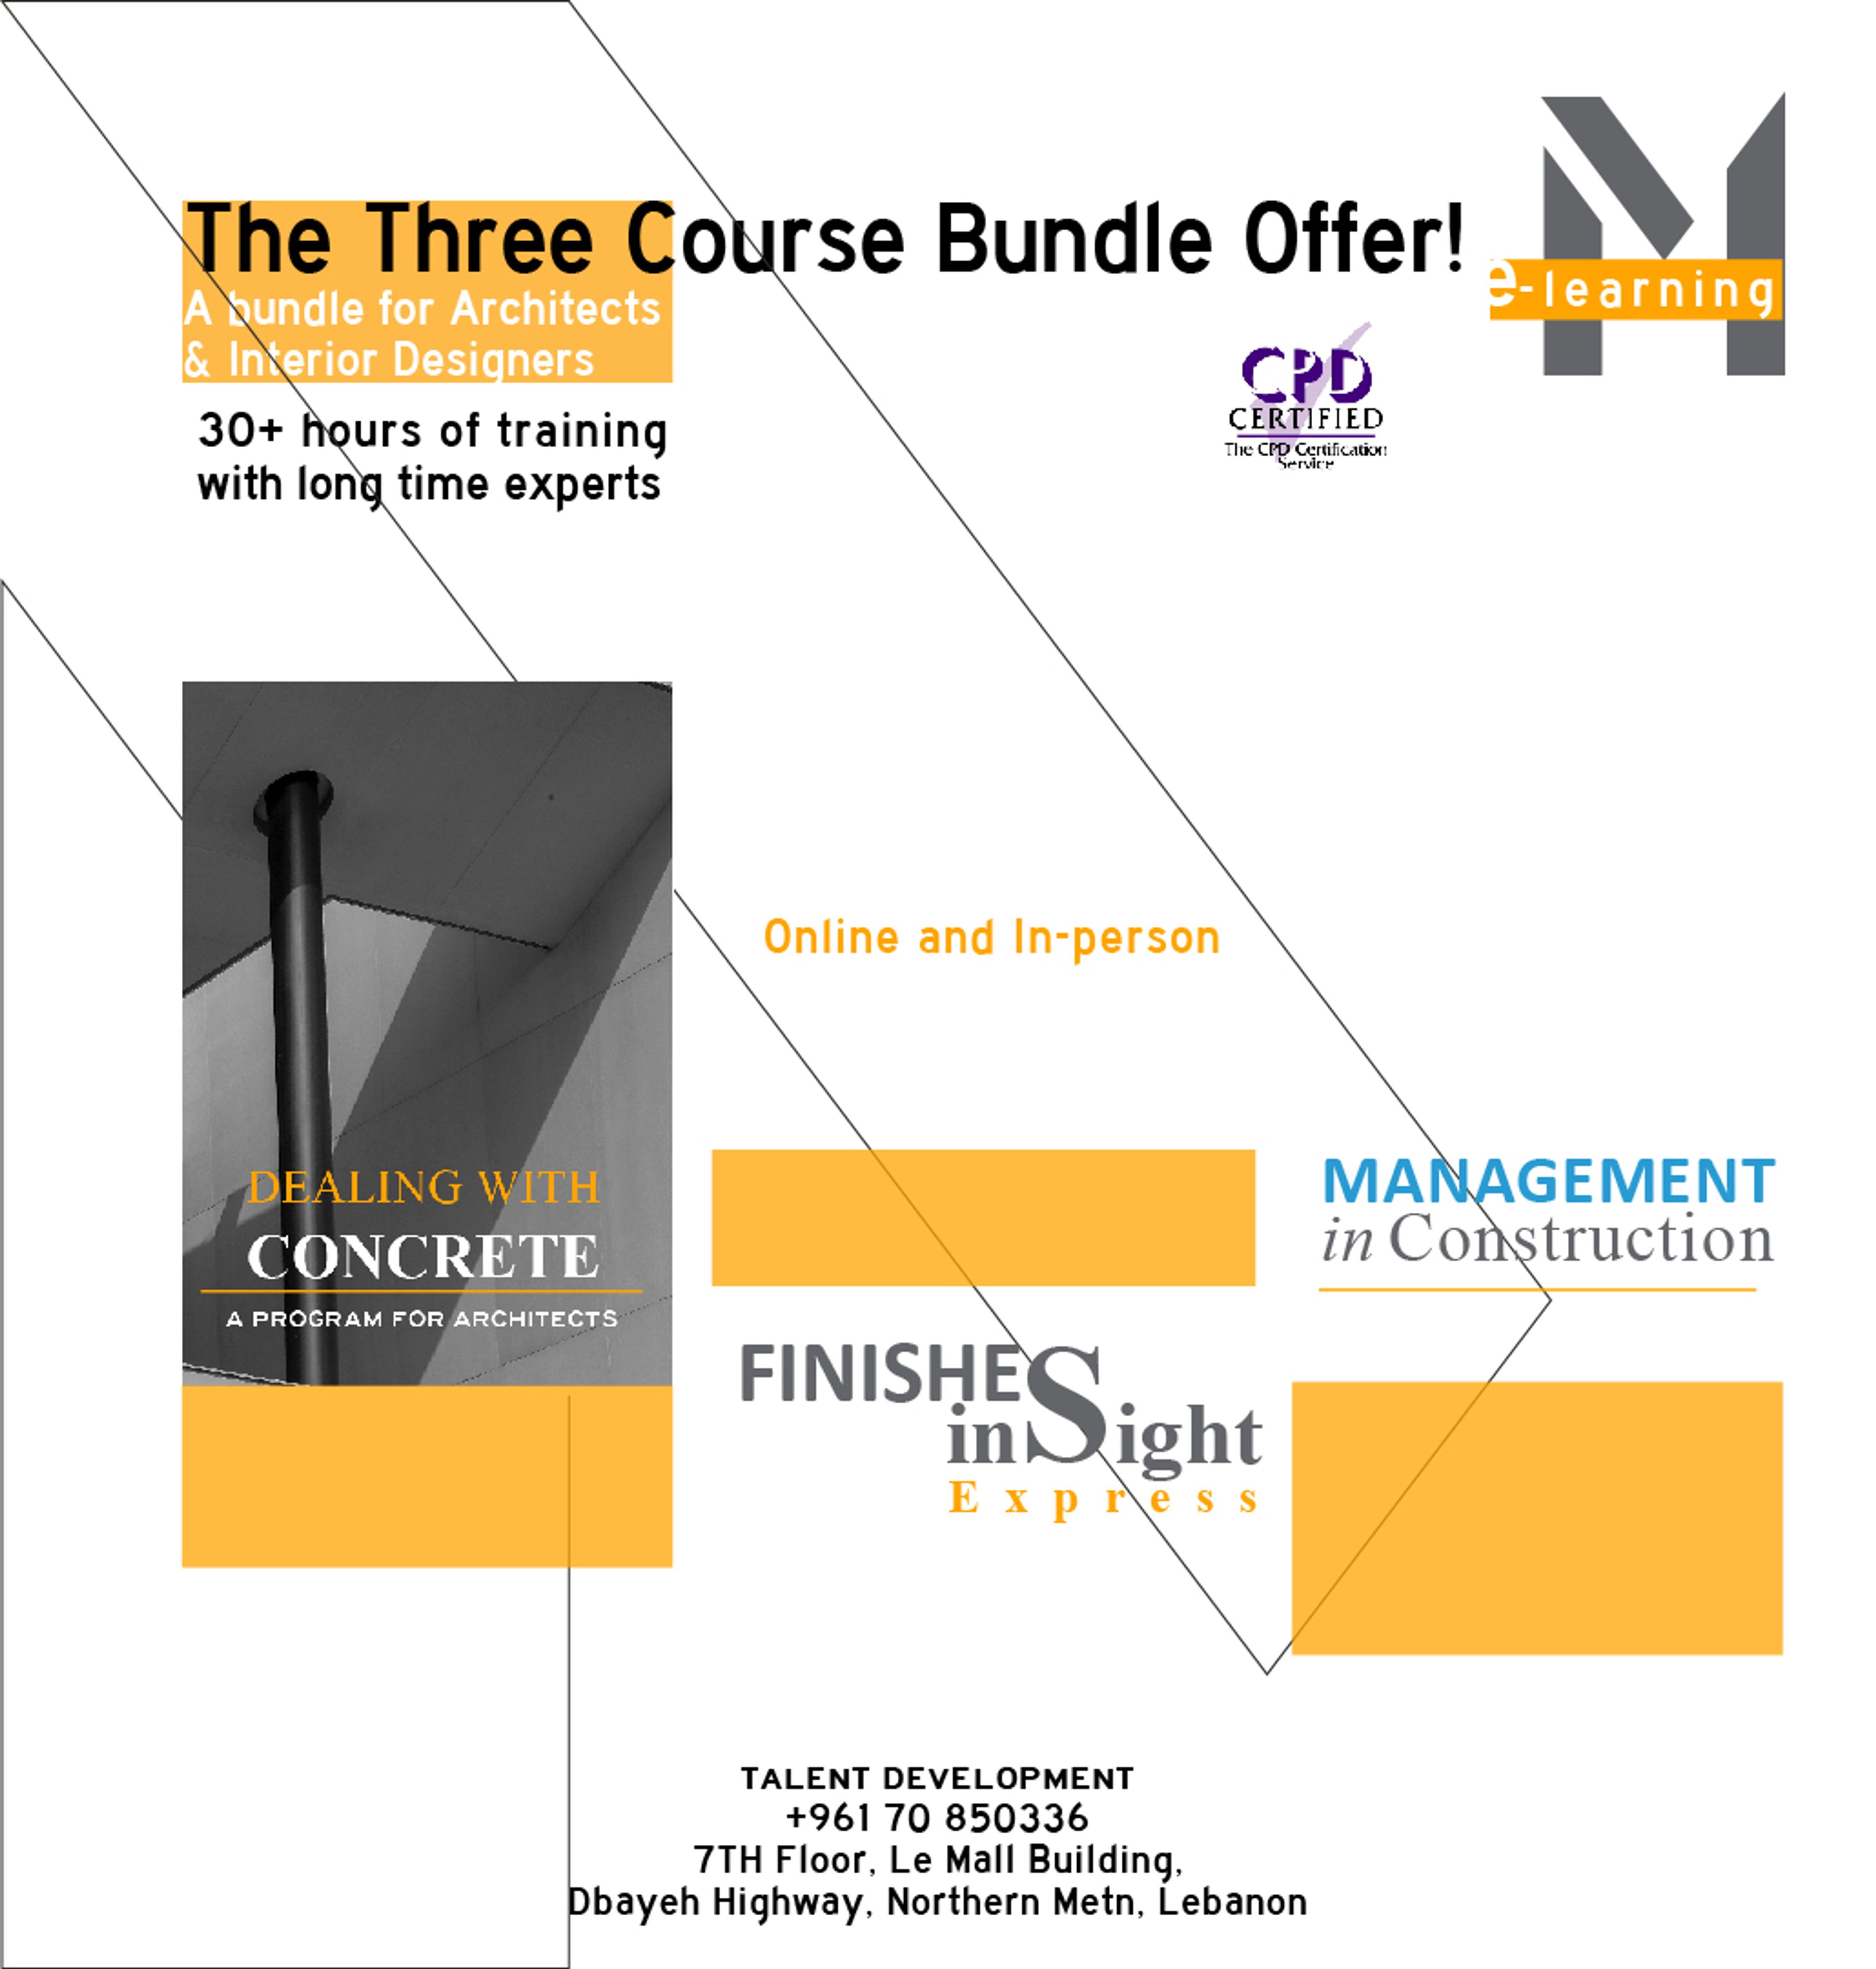 THE THREE-COURSE BUNDLE OFFER FOR CIVIL ENGINEERSARCHITECTS AND INTERIOR ARCHITECTS